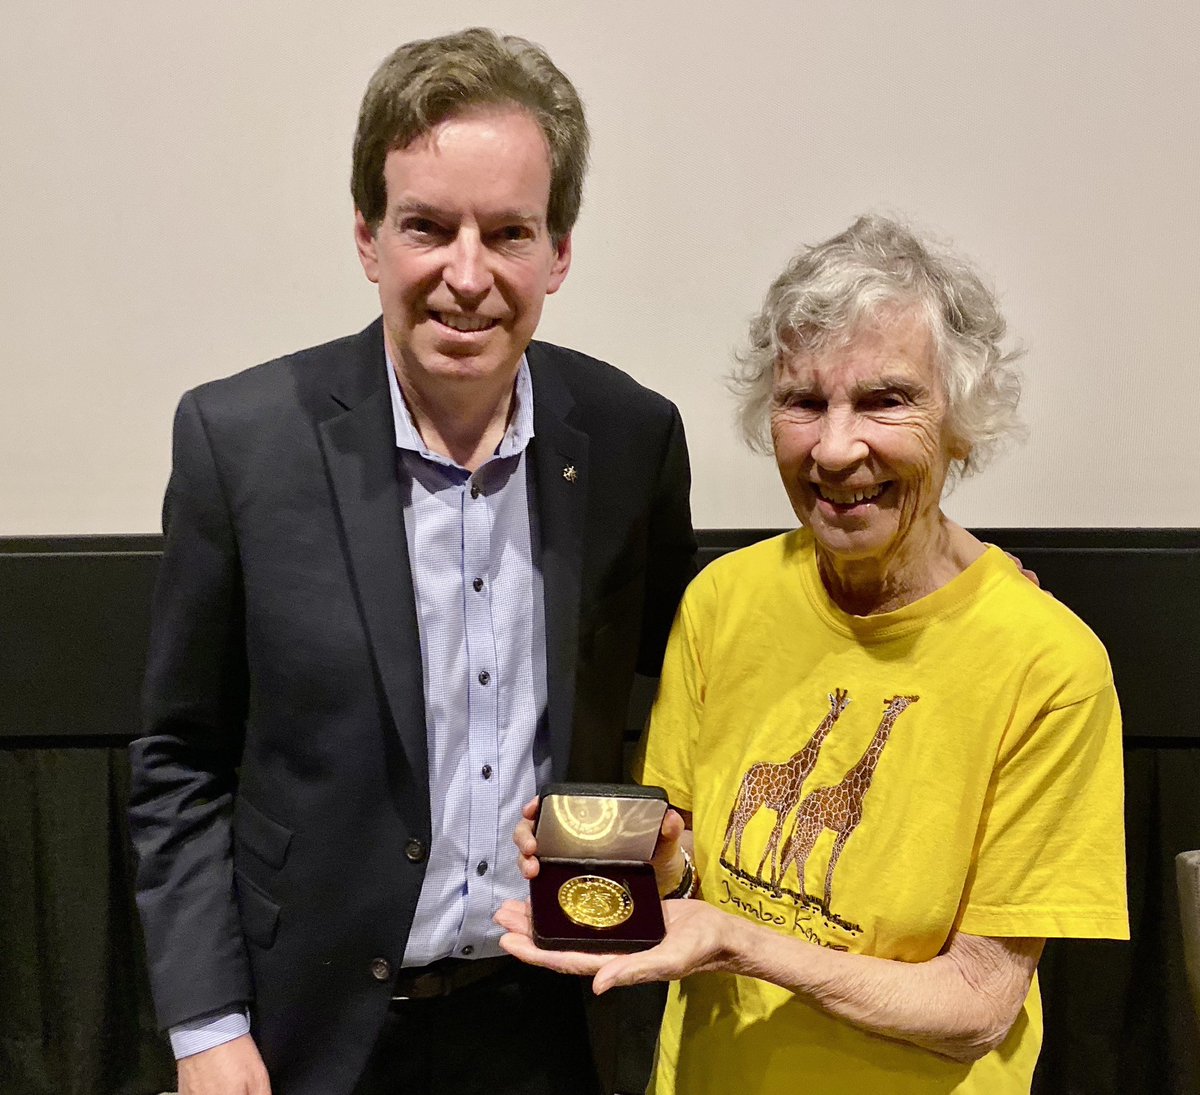 Anne Innis Dagg with her Lawrence J. Burpee Medal and our CEO @JohnGGeiger.